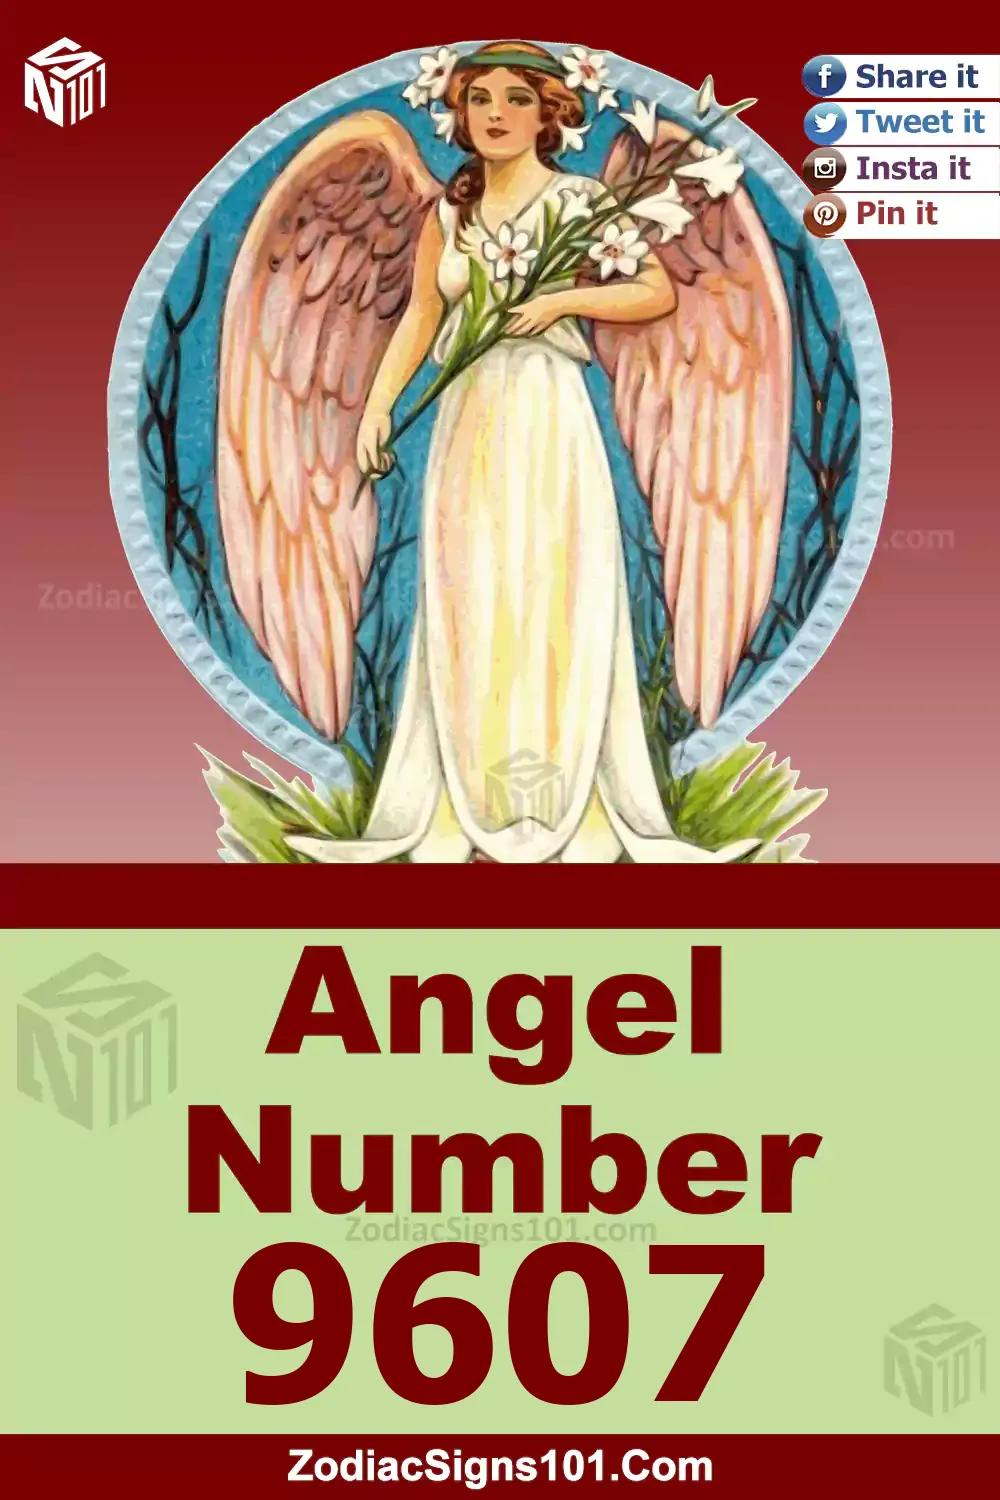 9607 Angel Number Meaning